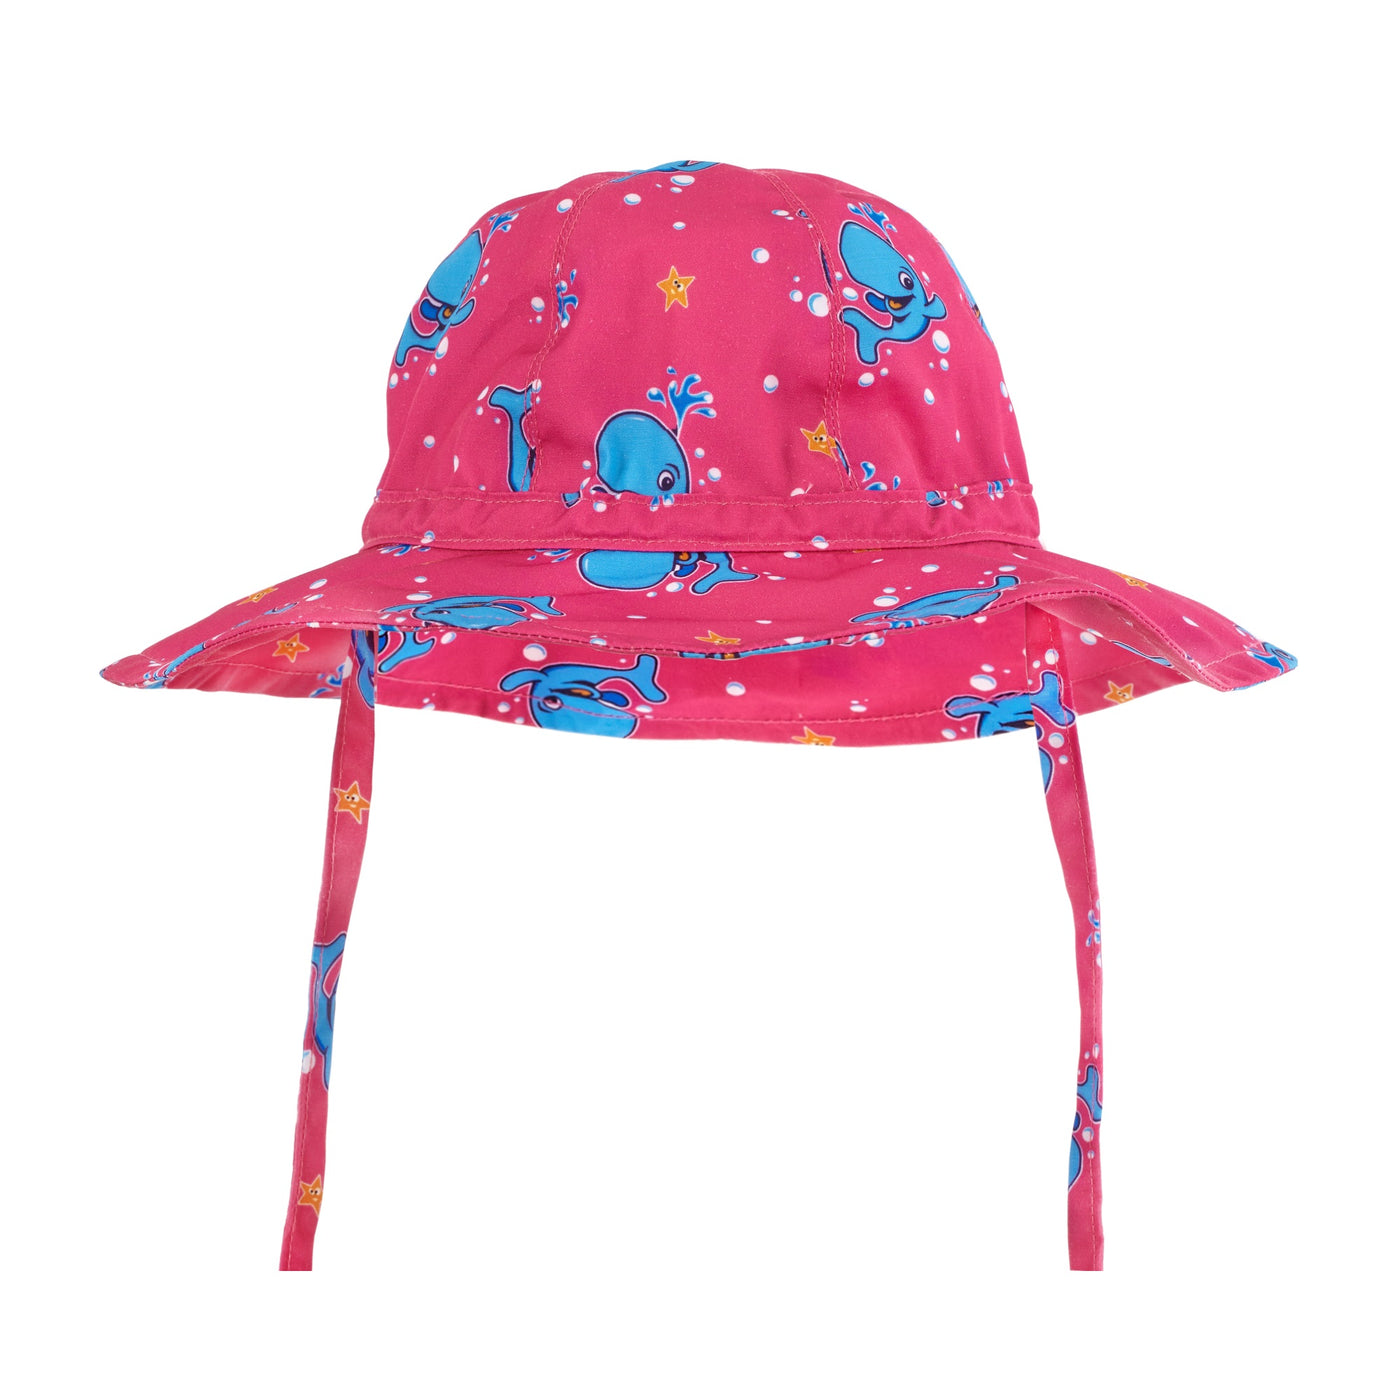 Floppy baby sun hat in pink Bubba the Whale print